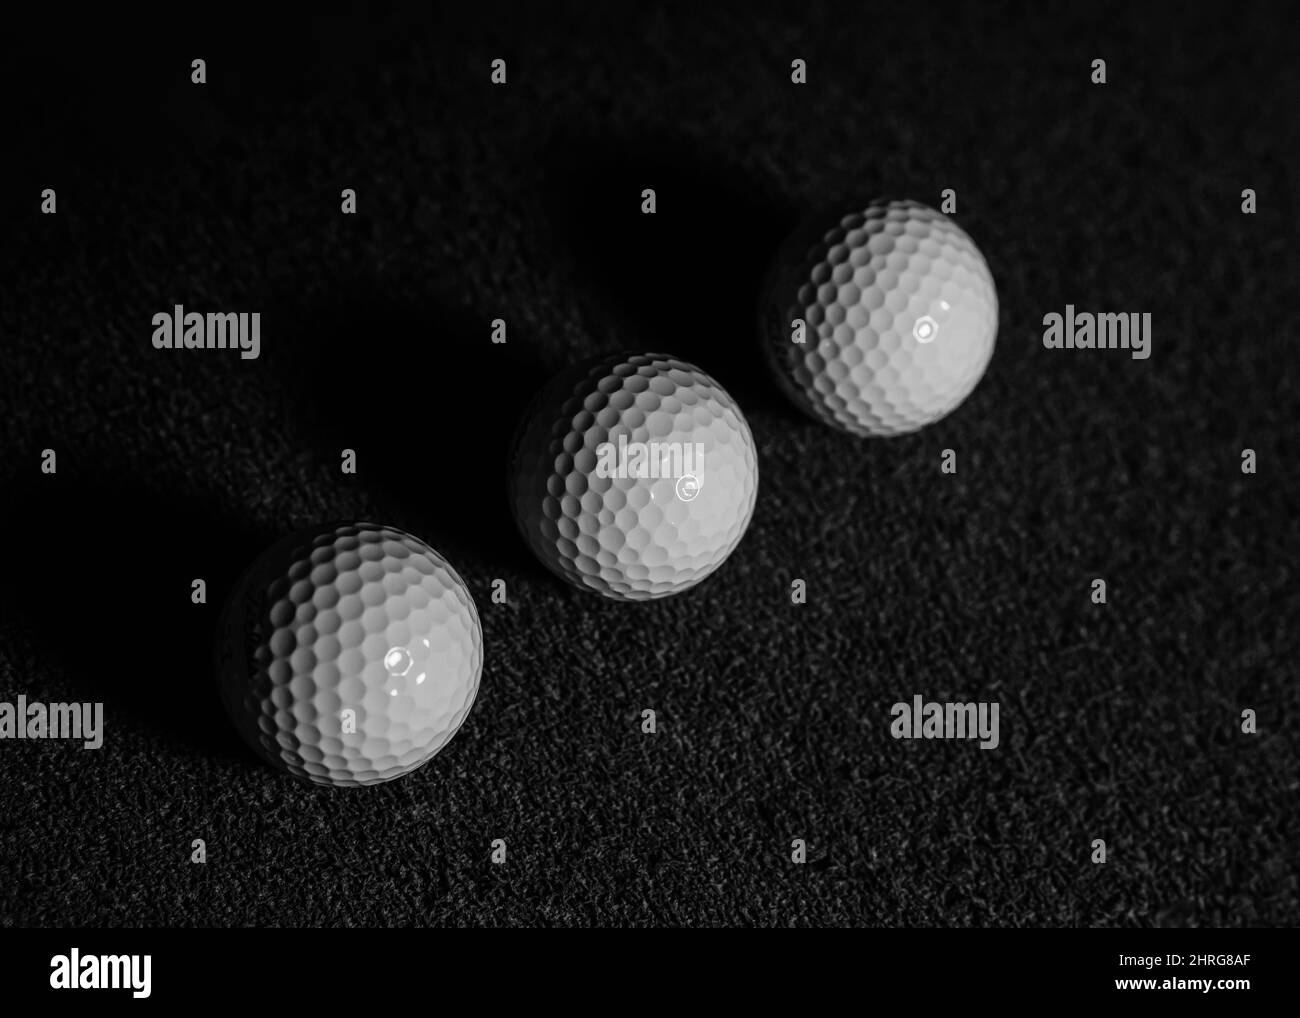 Grayscale of shot of trown shadow on some golf balls. Stock Photo